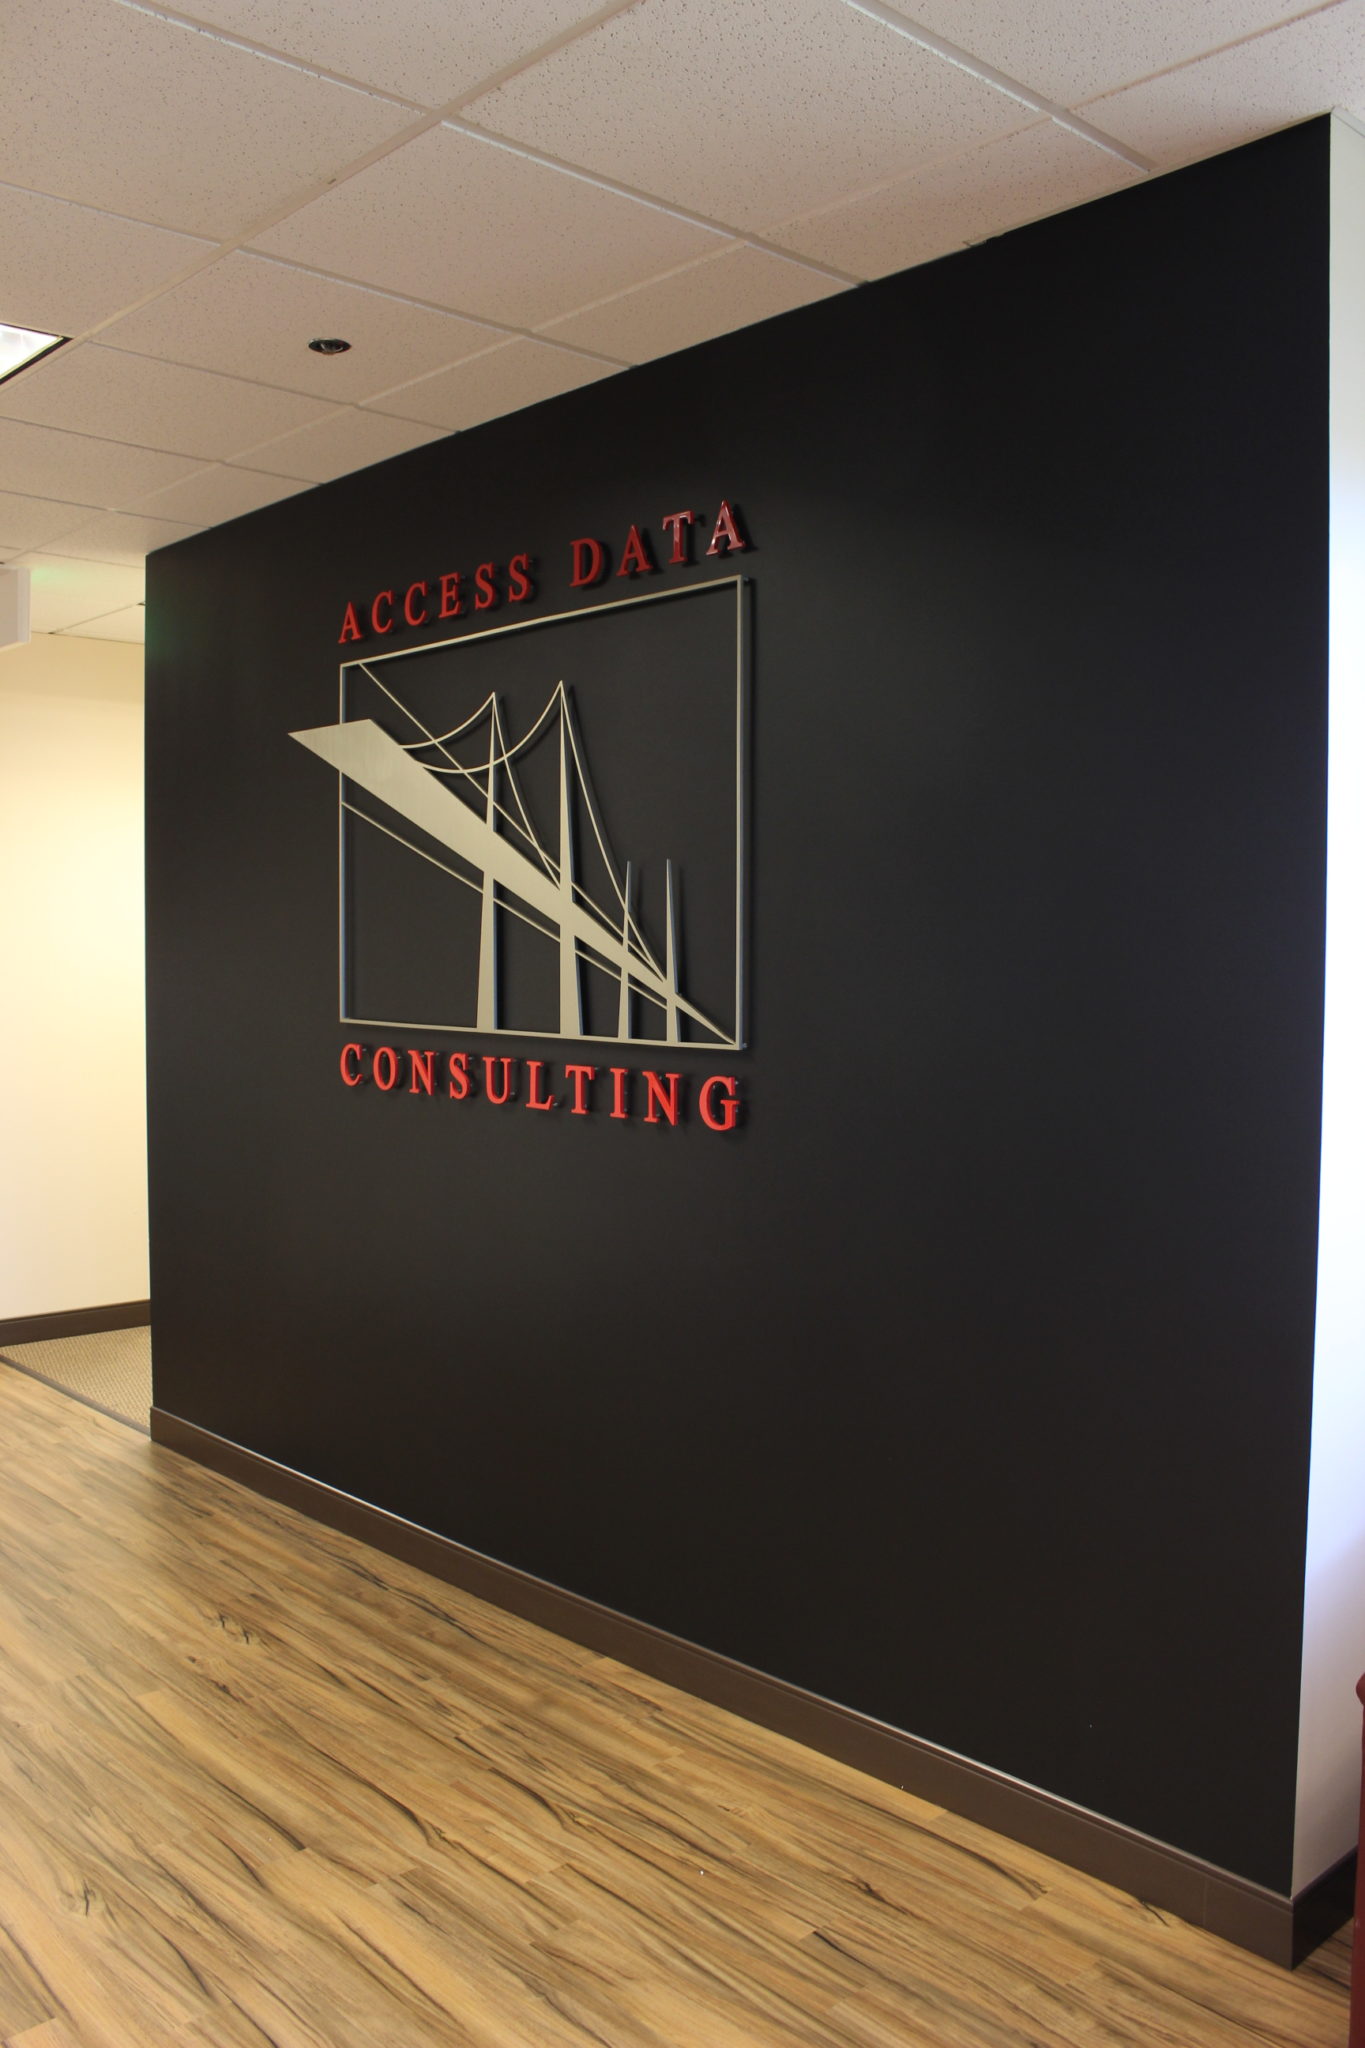 Access Data Consulting